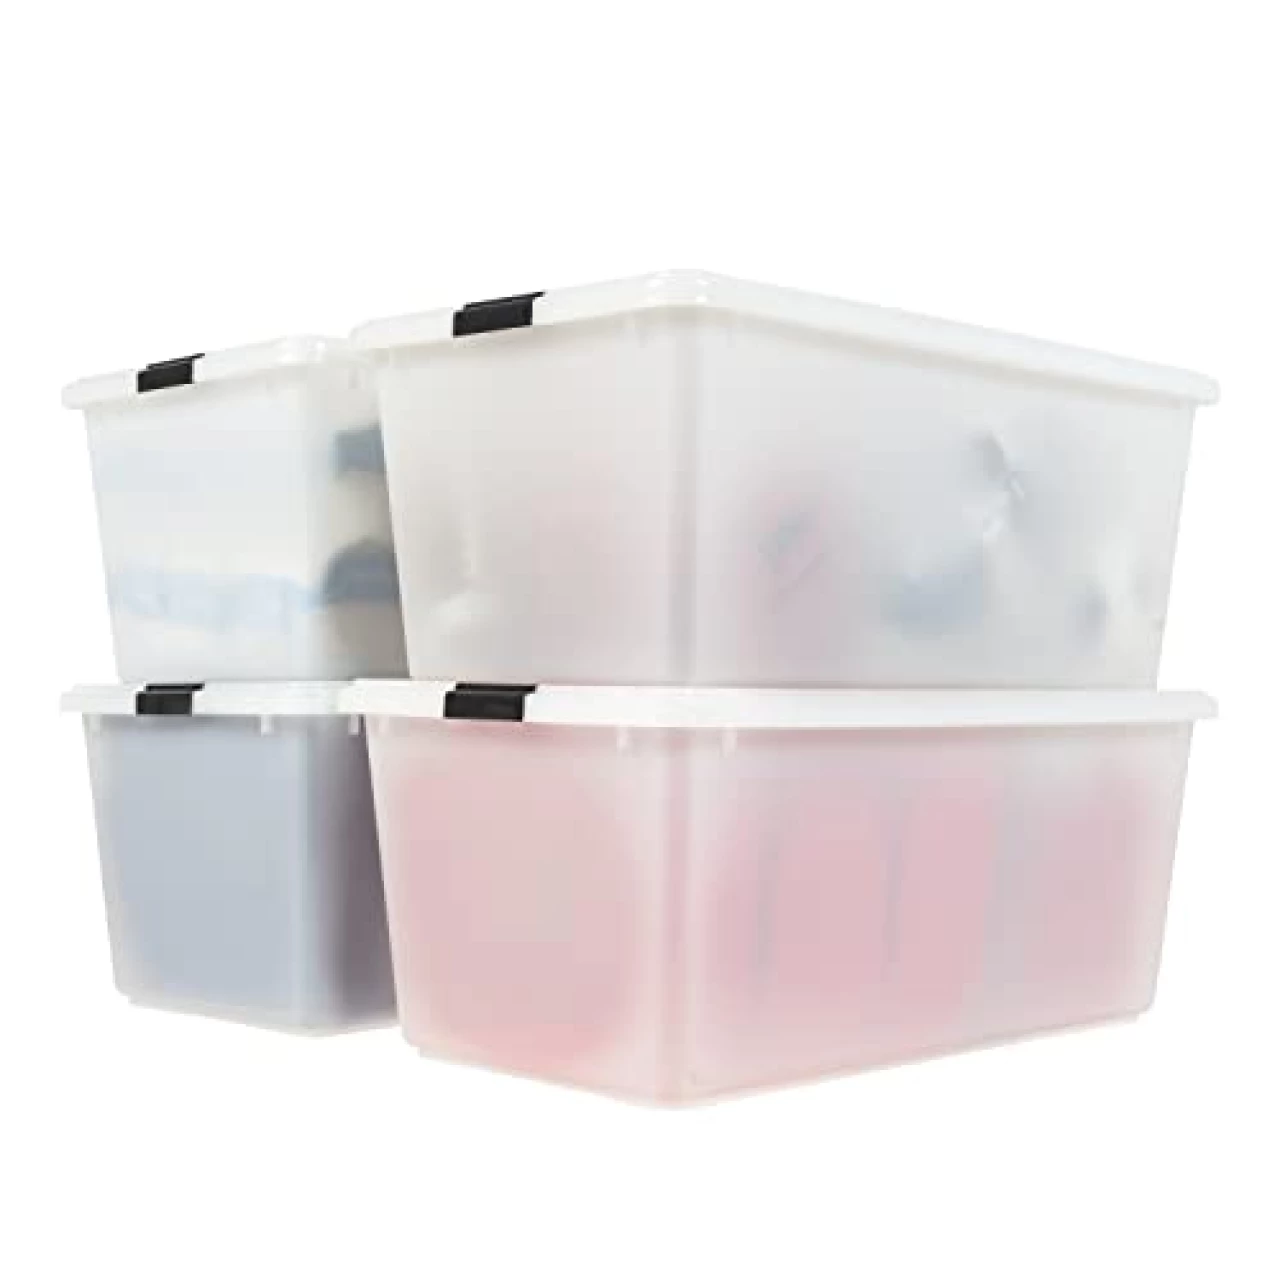 IRIS USA 91 Qt. Plastic Storage Container Bin with Secure Lid and Latching Buckles, 4 pack - Pearl